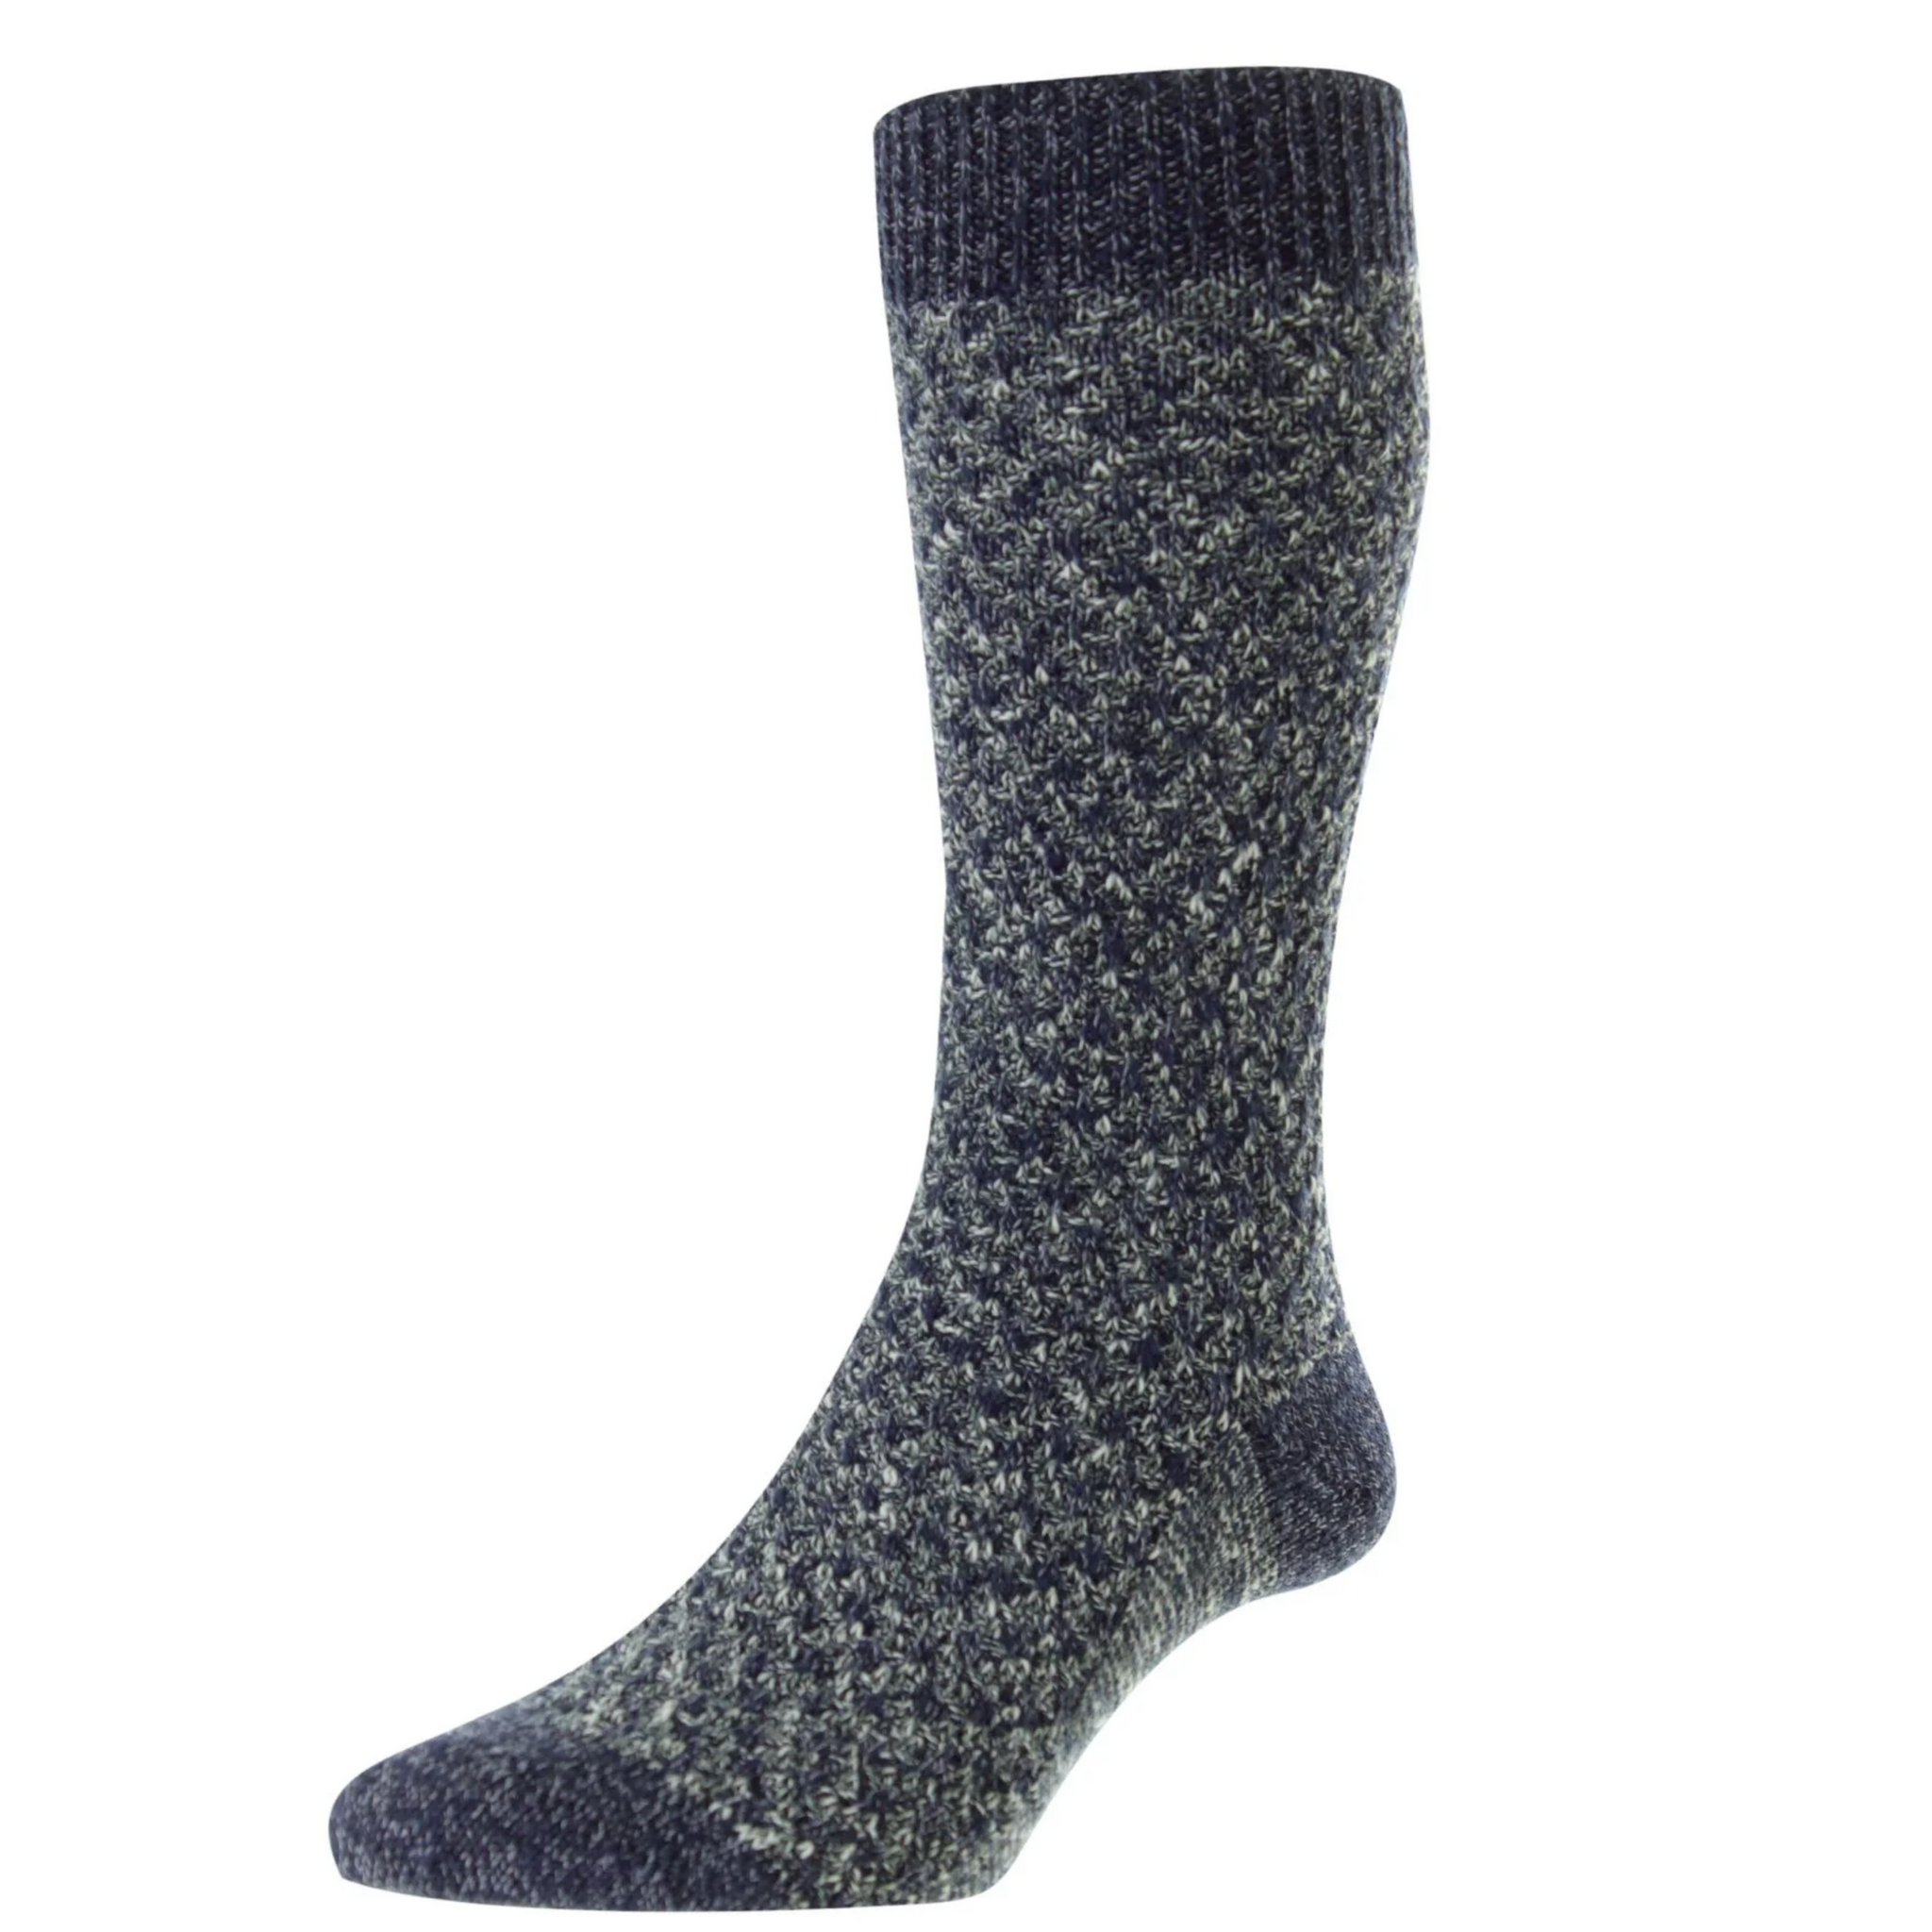 Pantherella - Rhos Socks - Black Sea Mix - Eco Luxe Collection